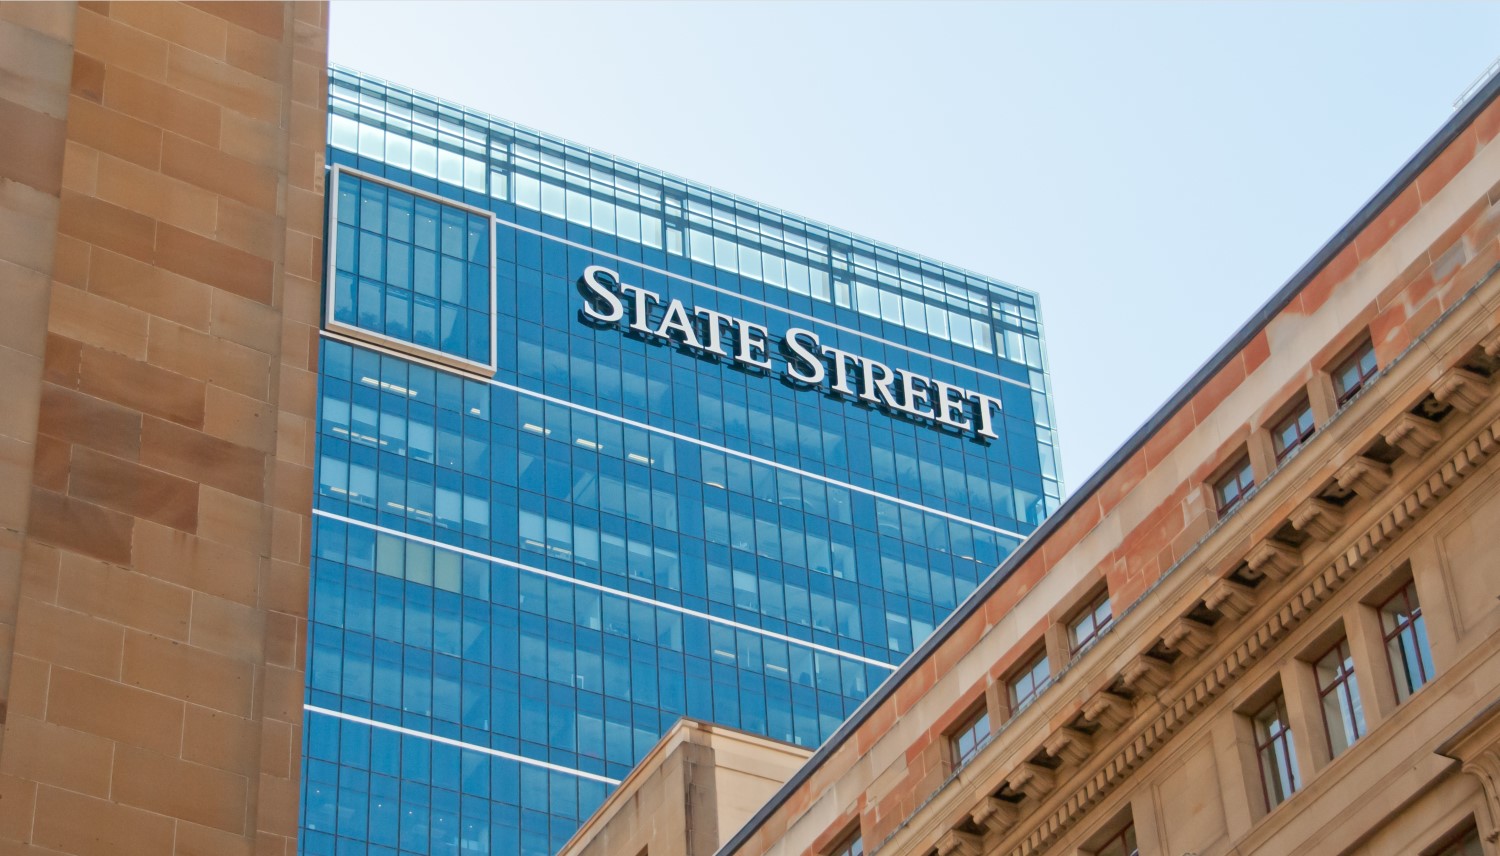 State Street: 38% Of Clients Will Put More Money Into Digital Assets In 2020